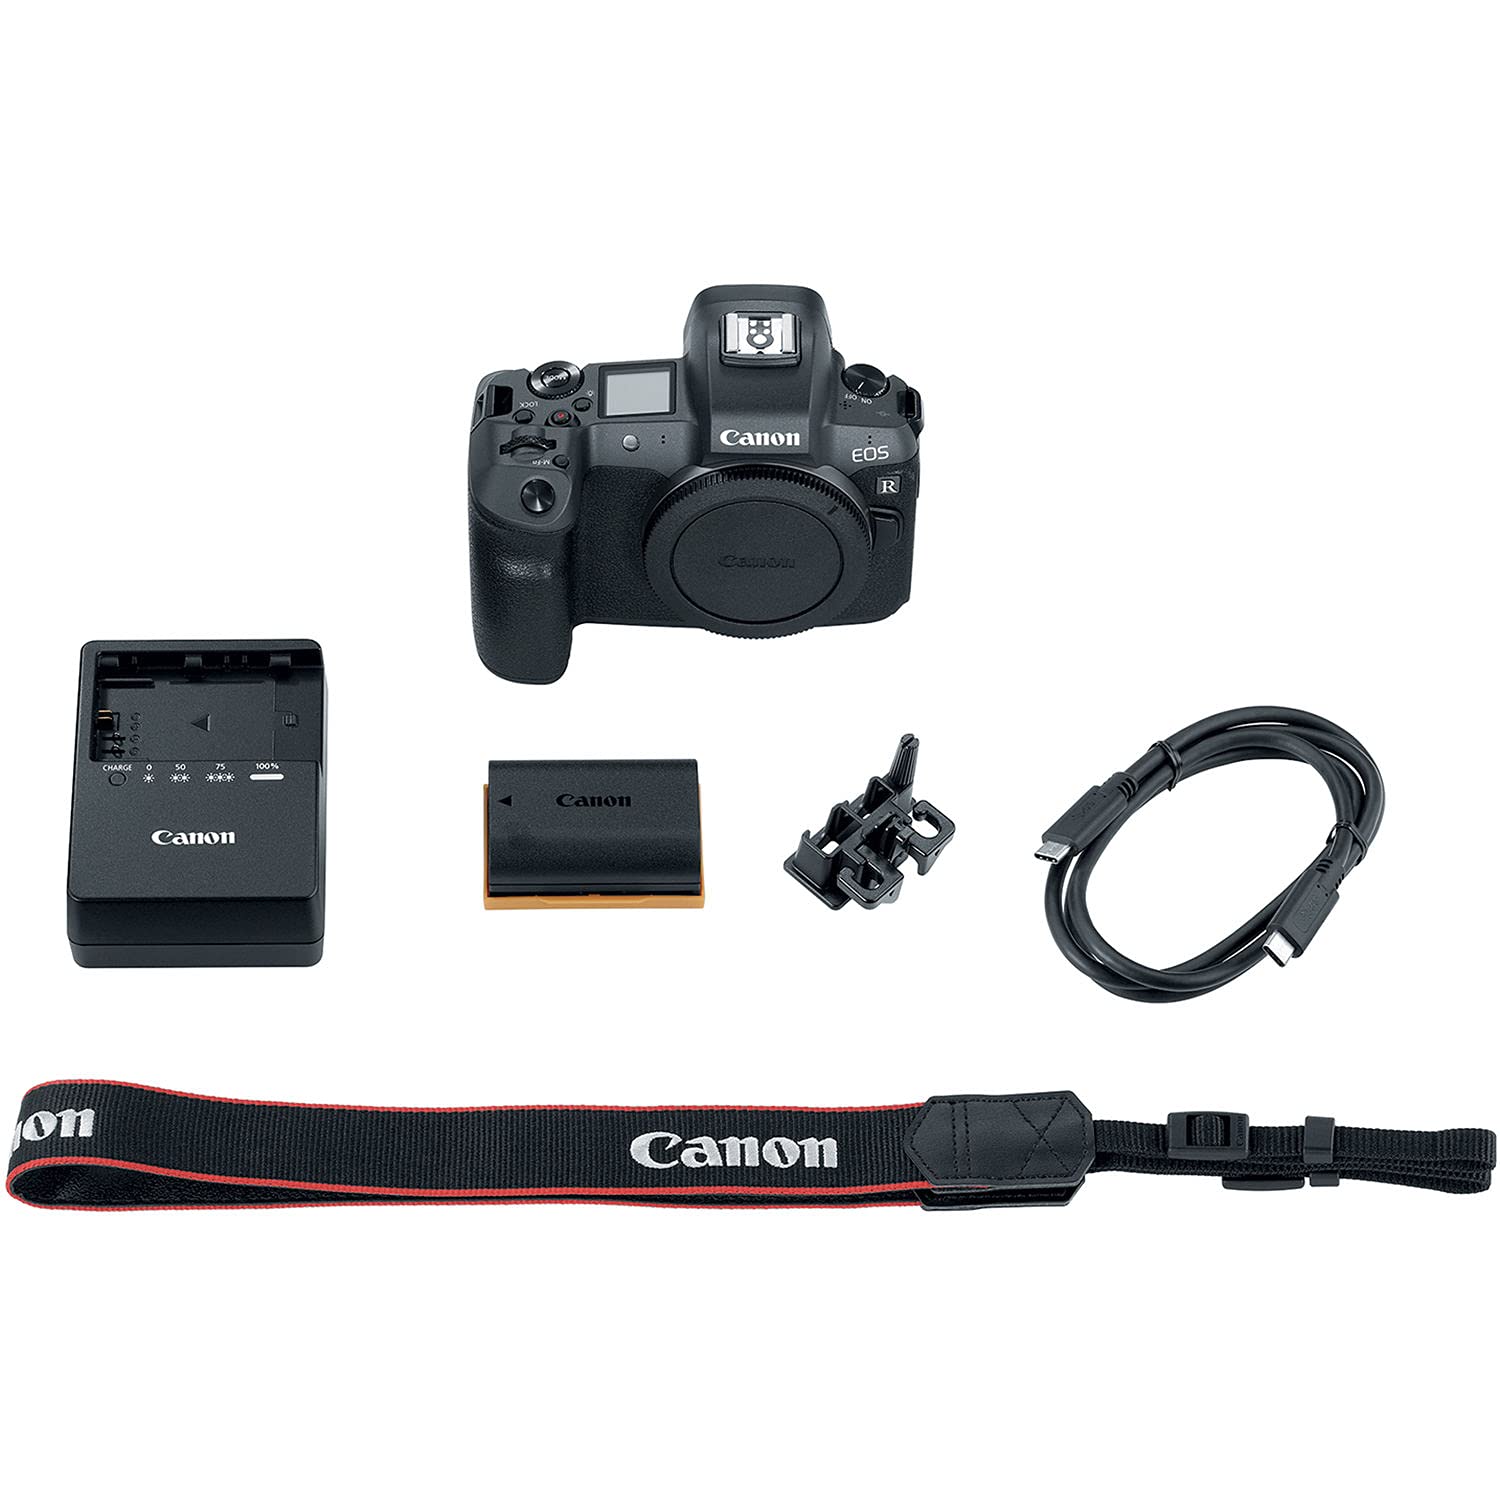 Canon EOS R Mirrorless Digital Camera 3075C002 with Canon EF Mount Adapter, Canon EF-S 18-55mm Lens, Bag, 32GB Card and More (Renewed)